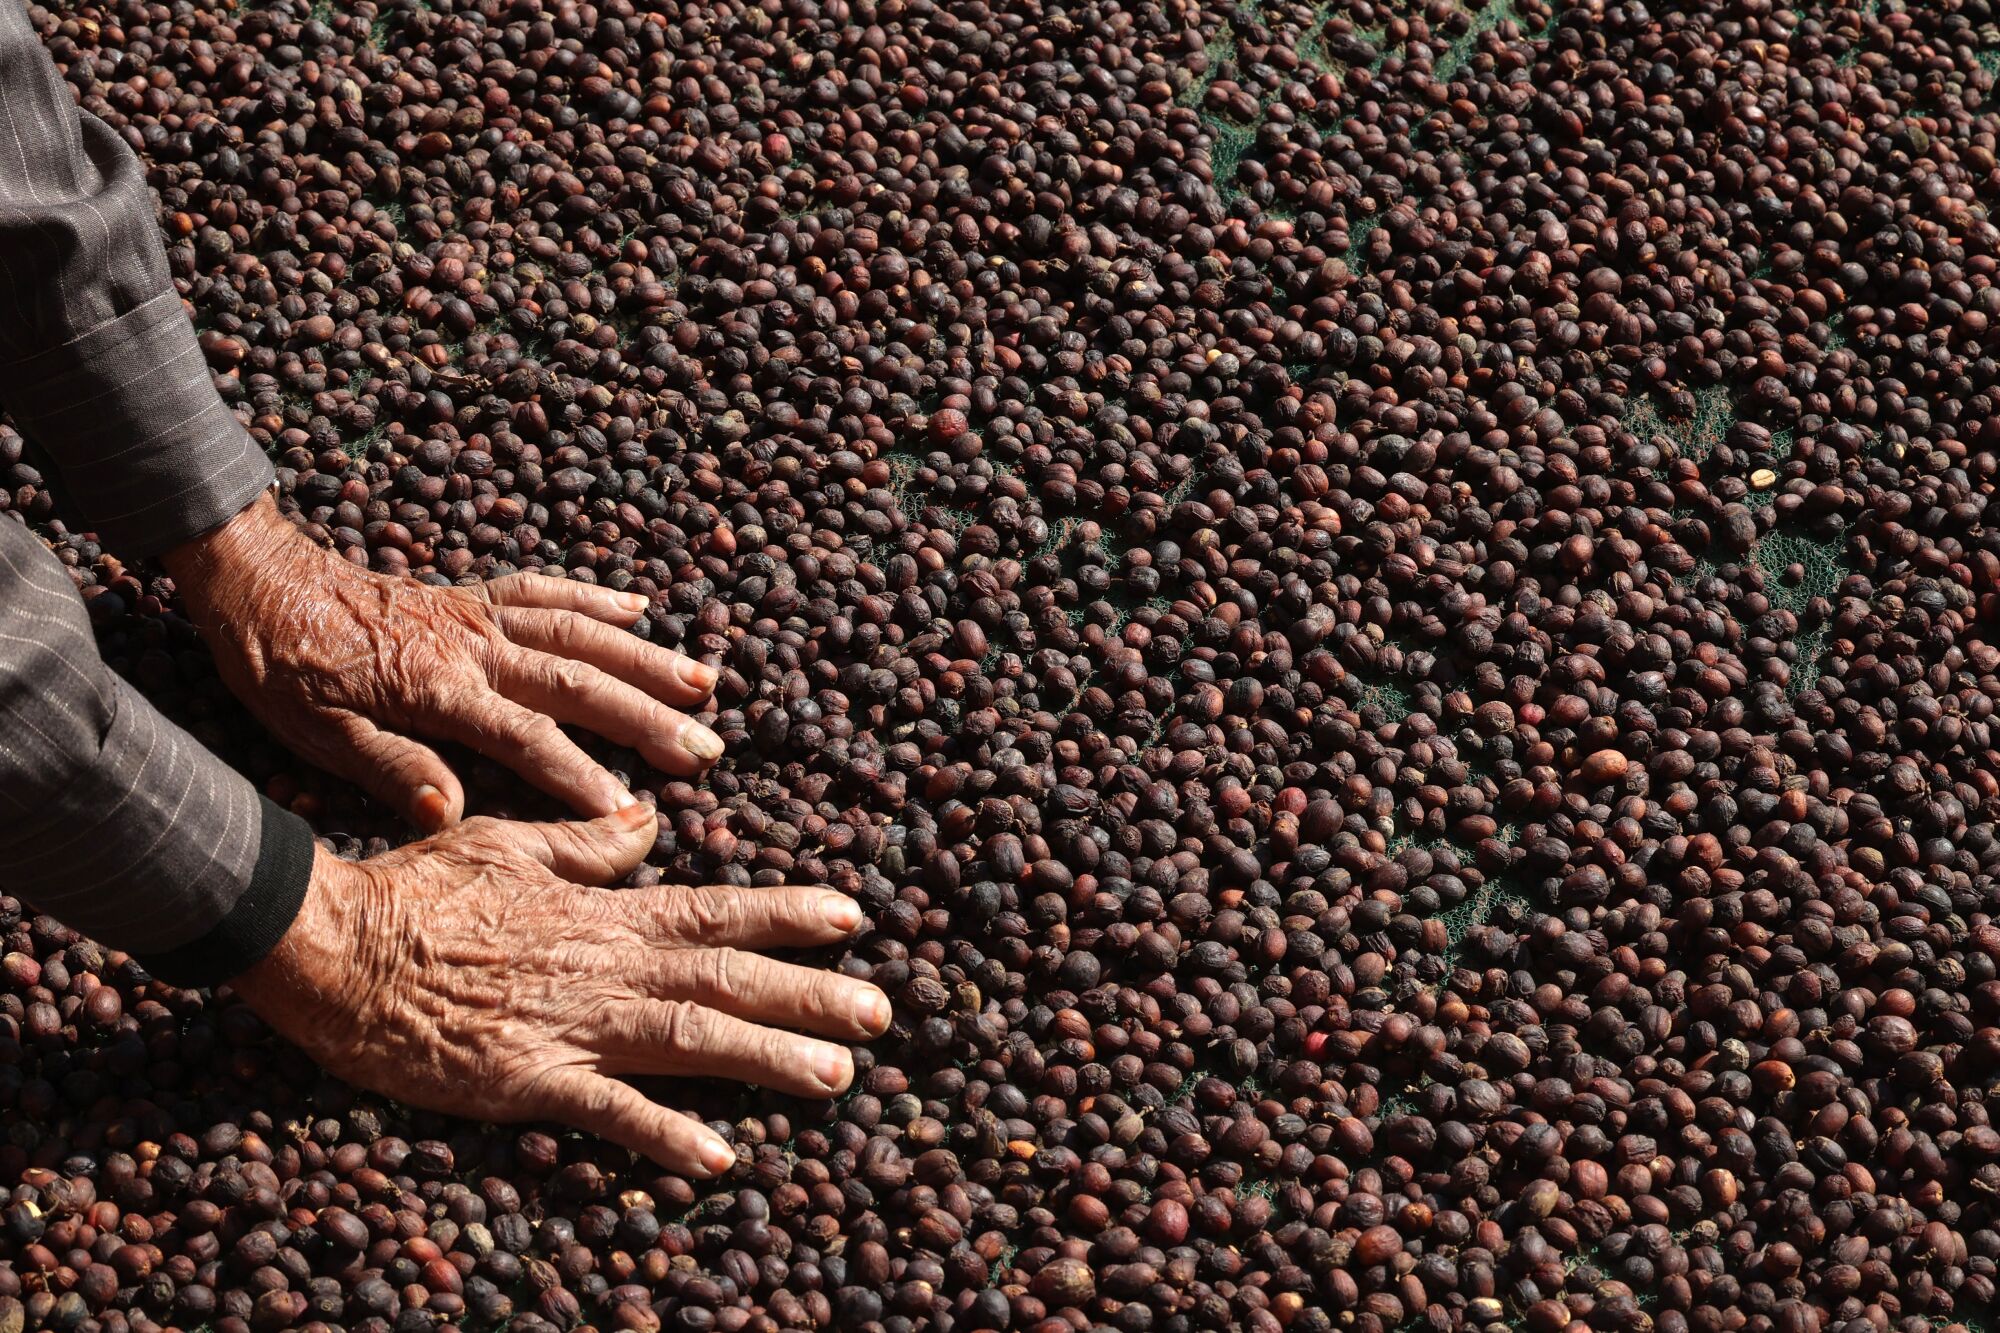 A farmer presses his hands against a layer of coffee beans.